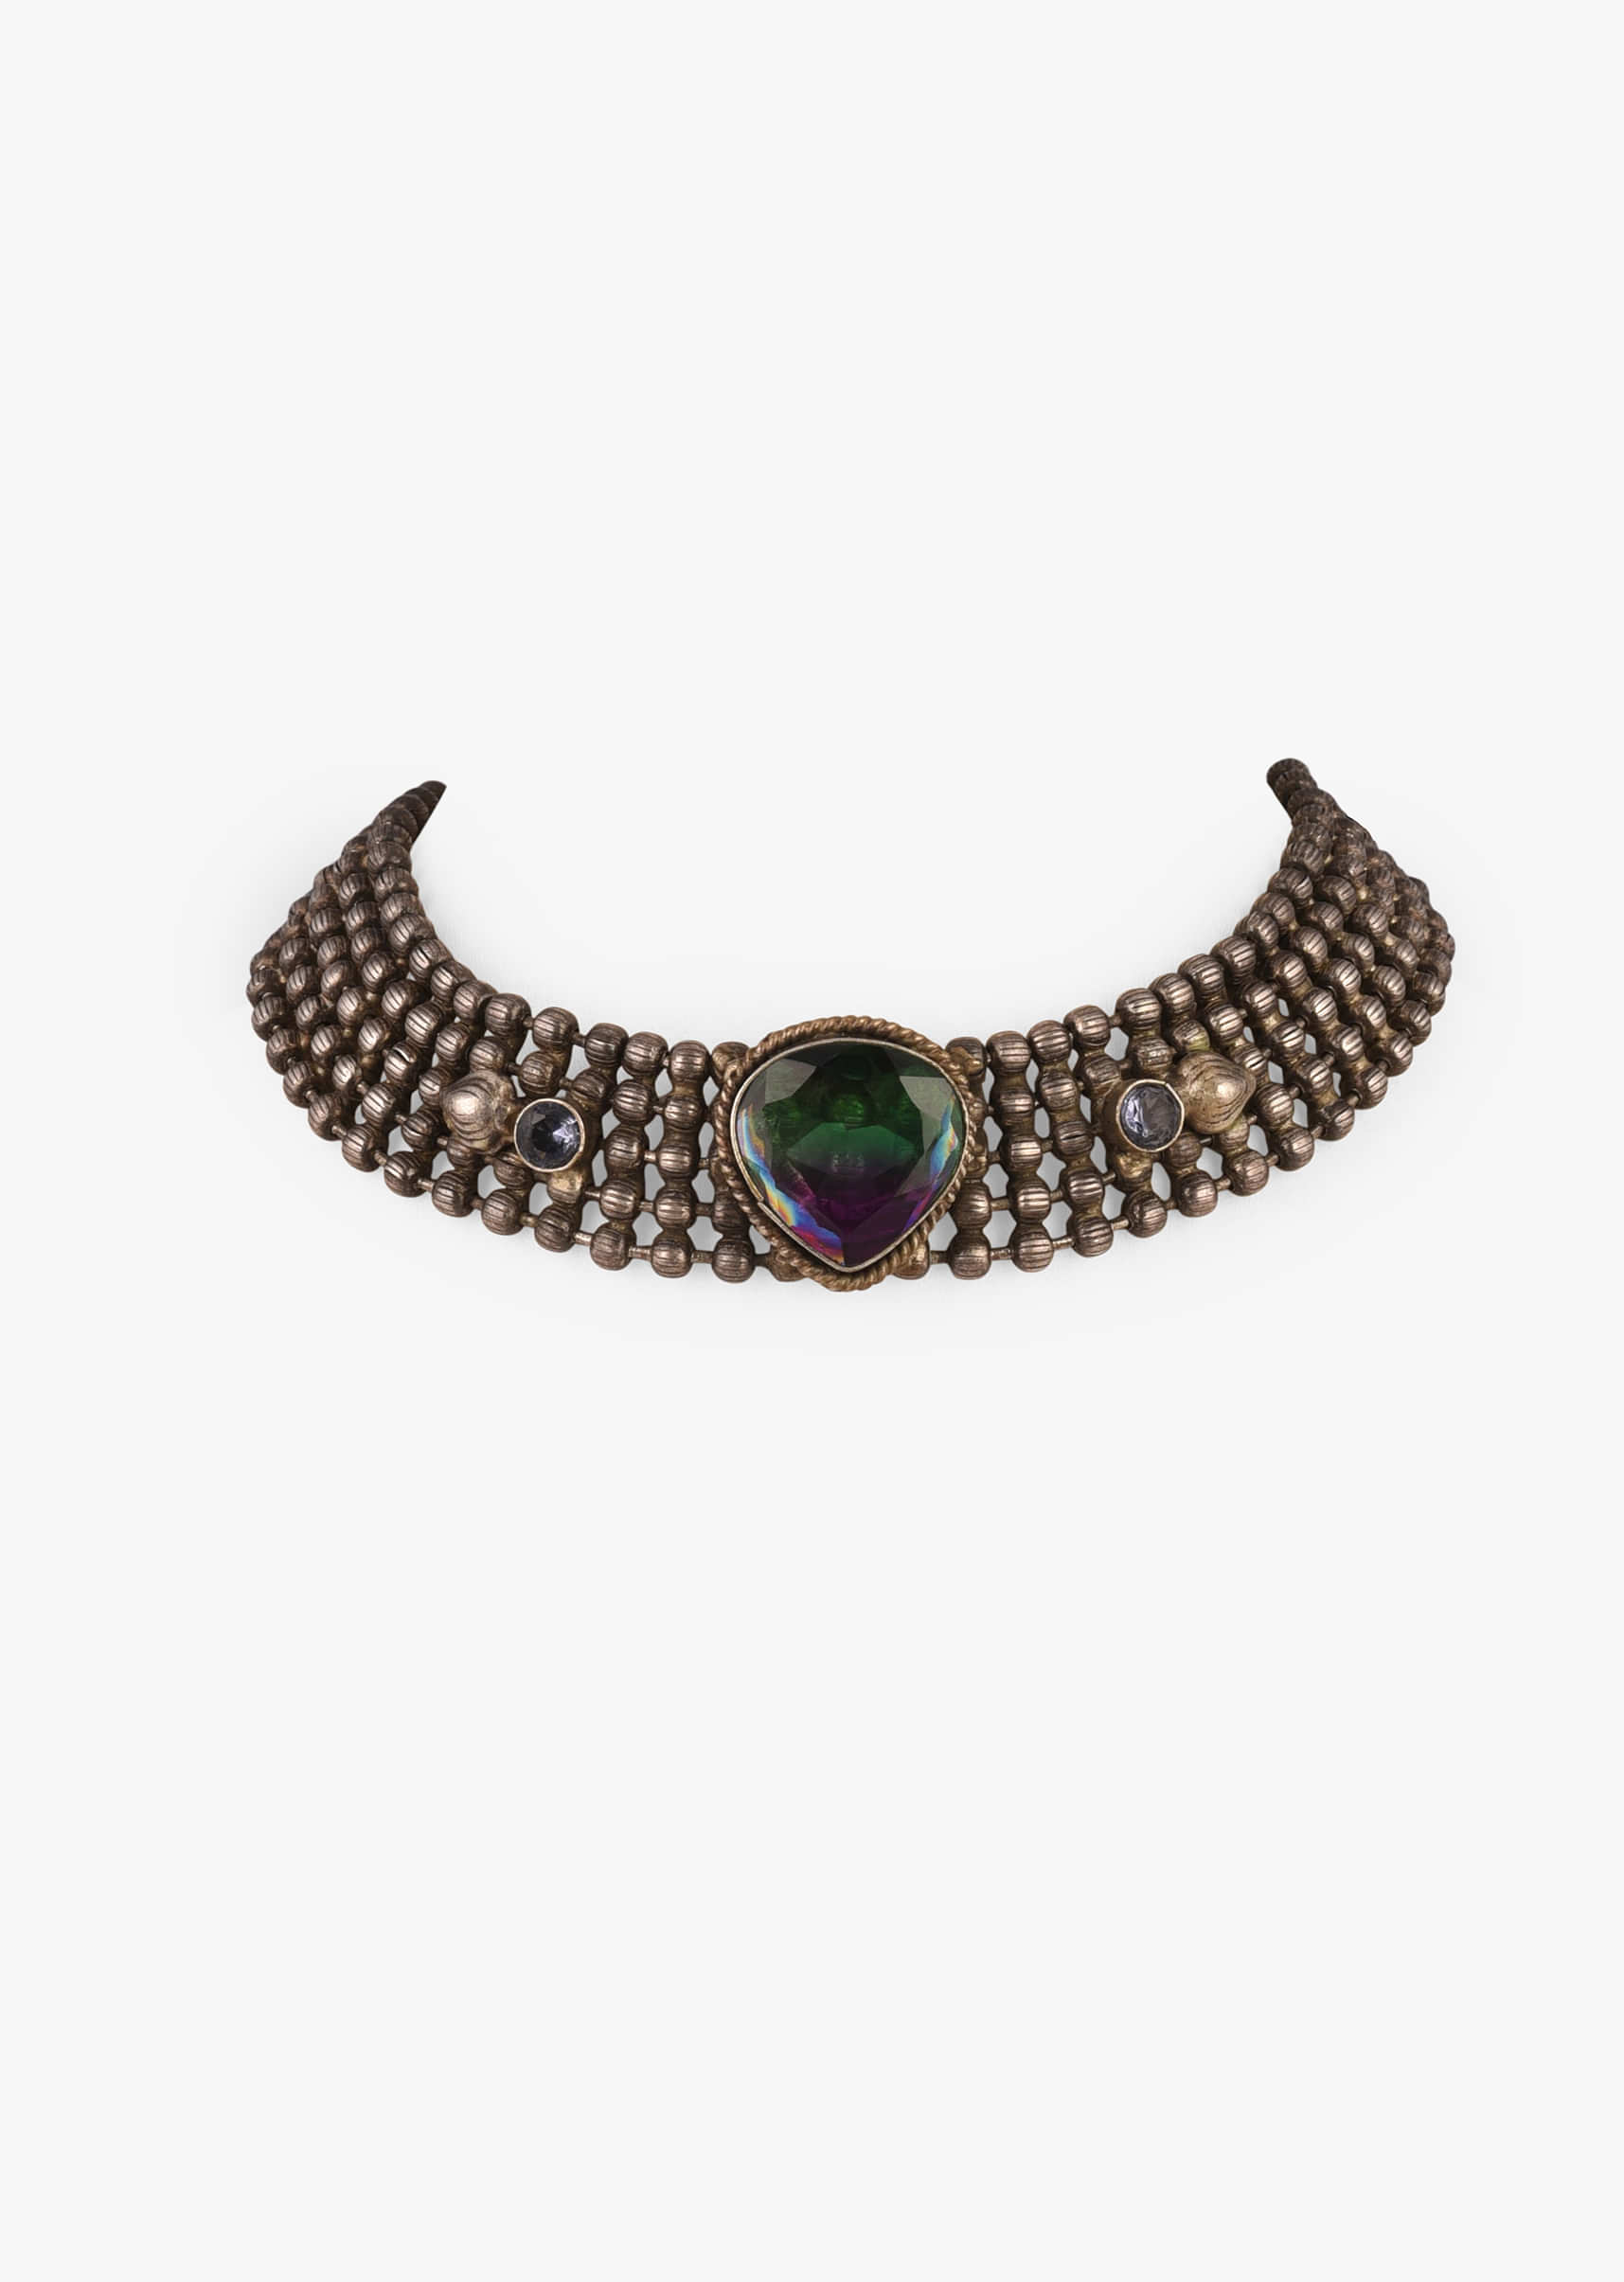 Oxidised Silver Choker Necklace With Iridescent Semi Precious Stone In The Centre And Metal Bead Base 